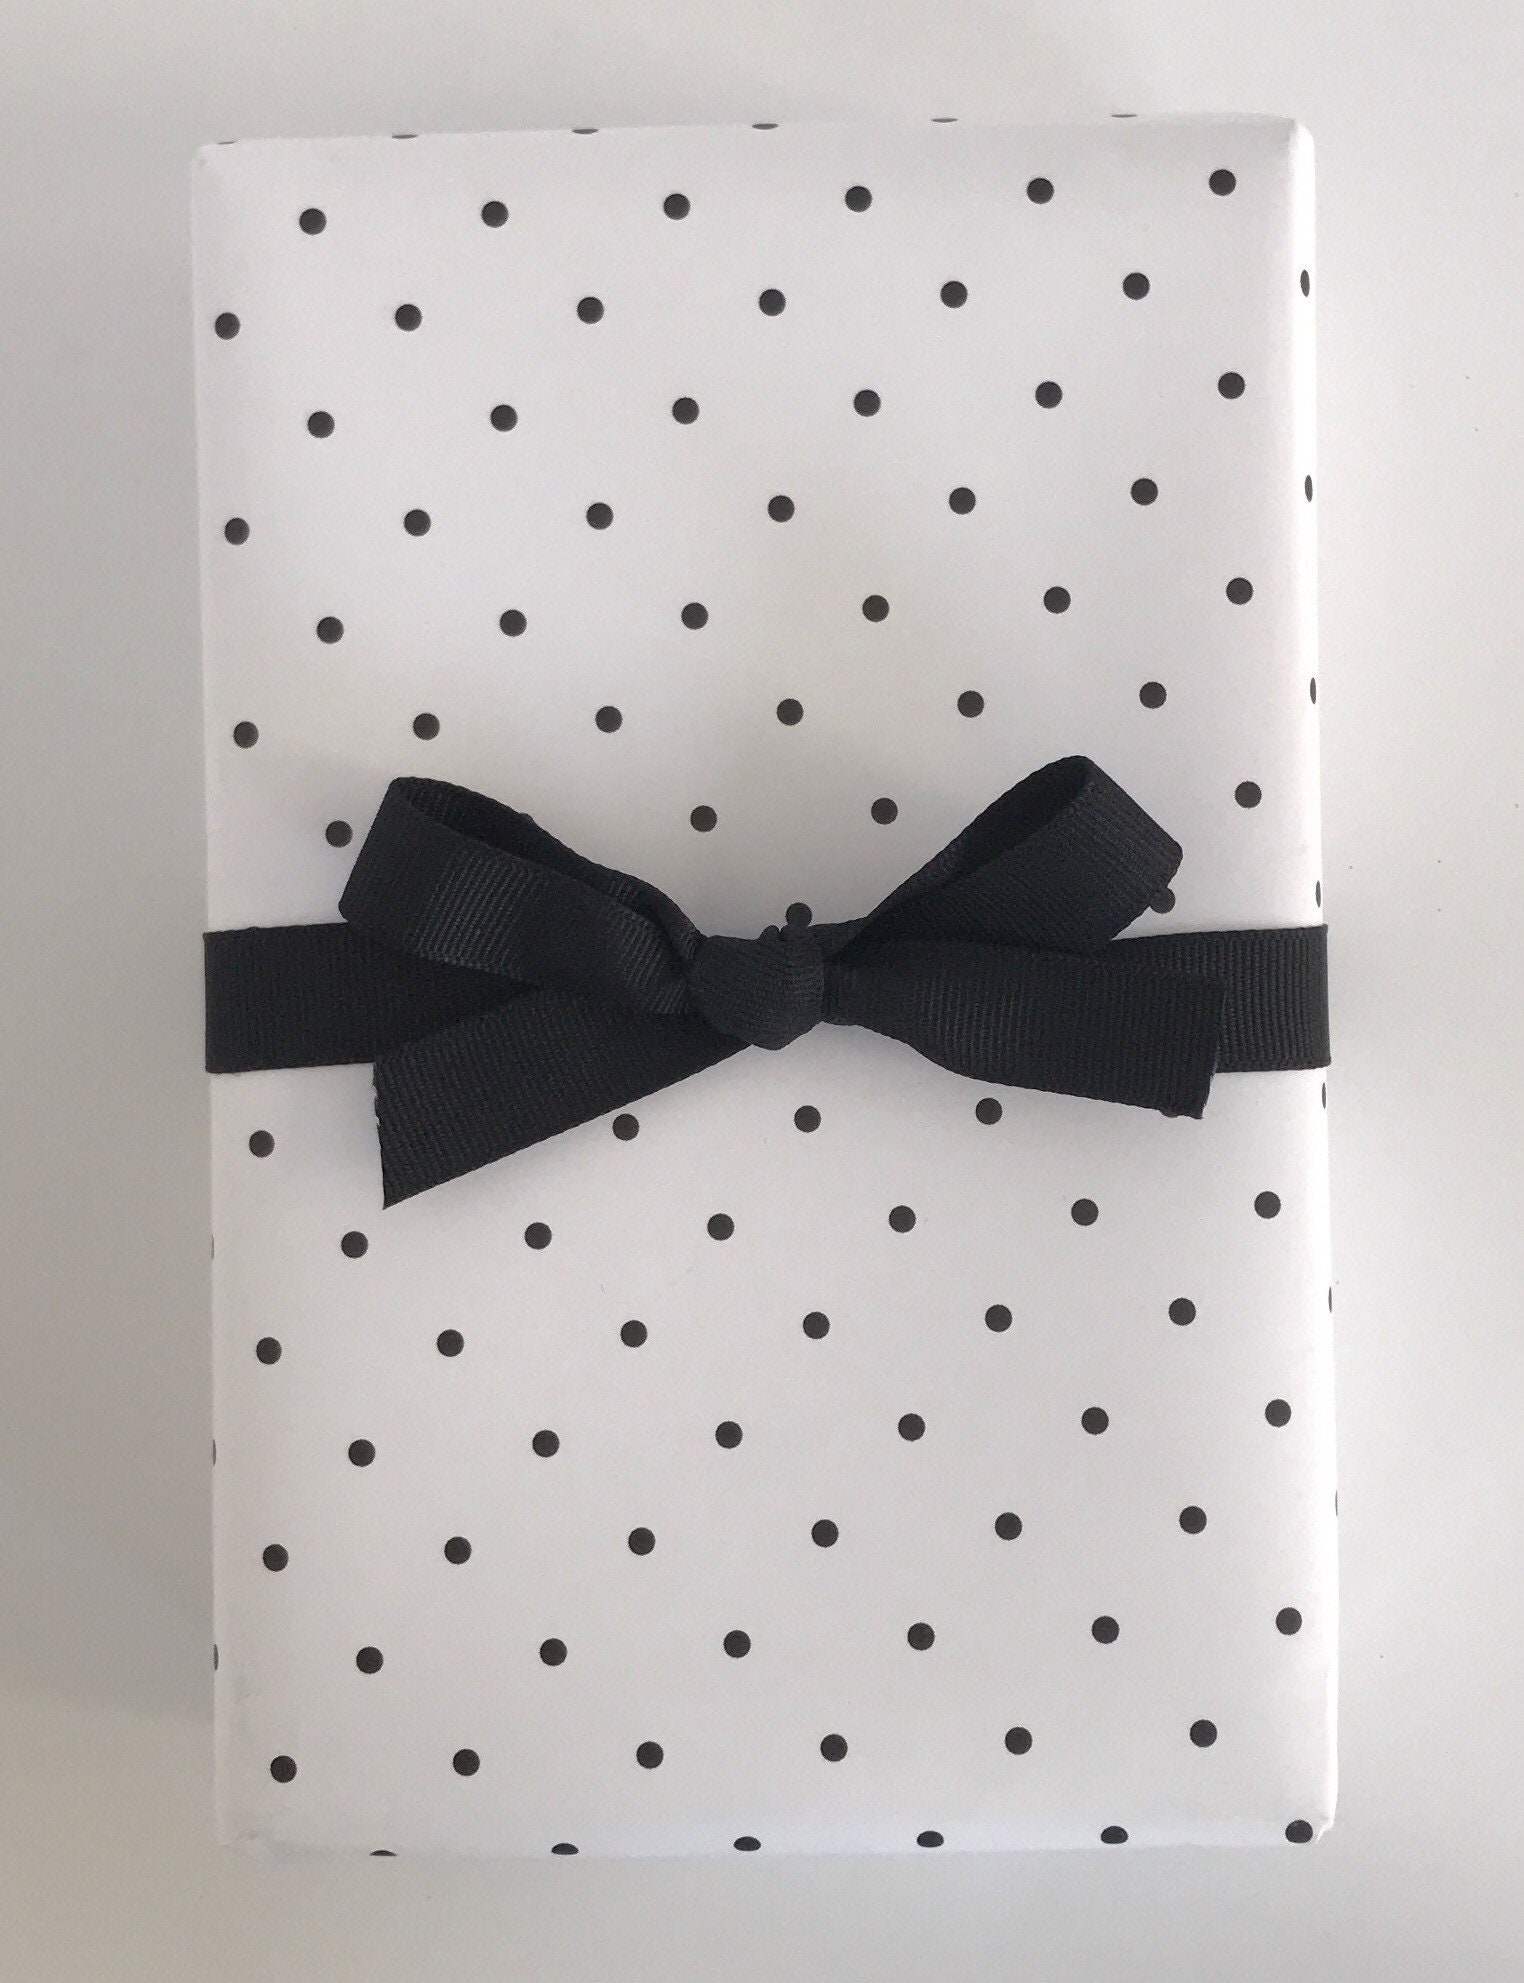 Current obsession alert!! Black and white wrapping paper at Target